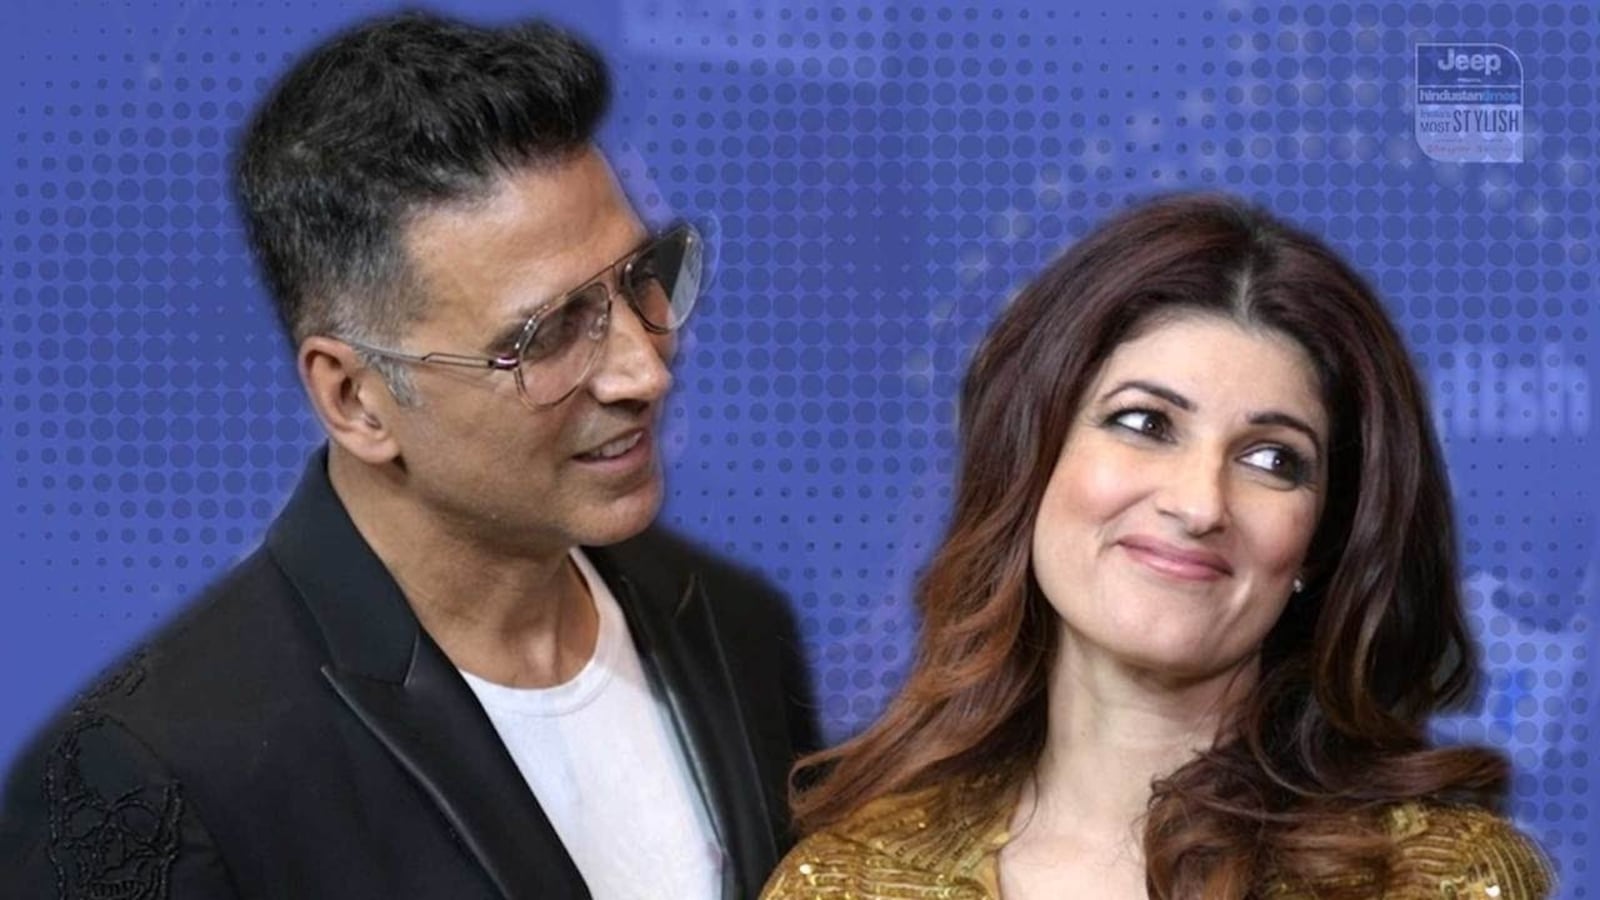 Twinkle Khanna gets advice on 'what not to write' by Akshay: 'I touch her  feet' | Web Series - Hindustan Times